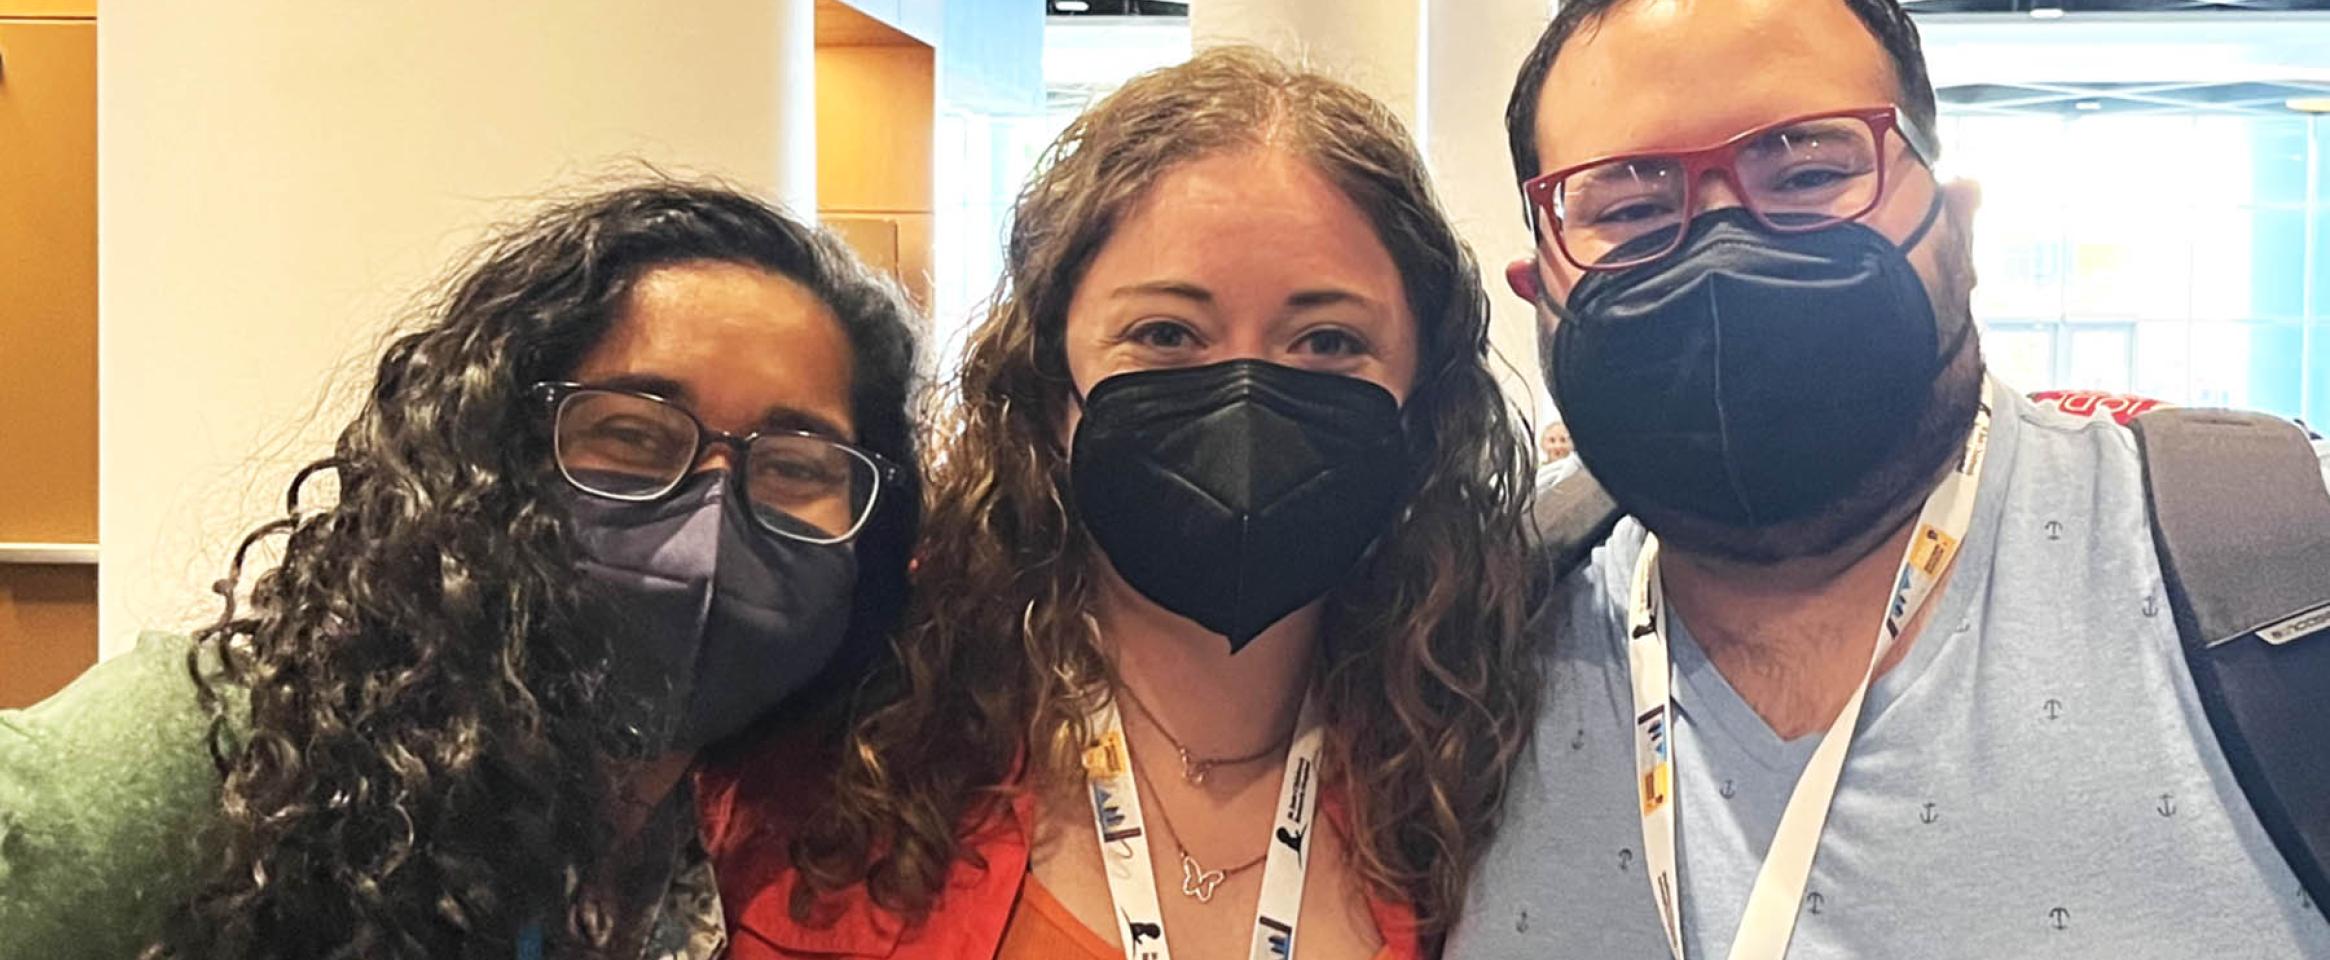 NASW members smile behind their masks while arm in arm at the Science Writers 2022 annual meeting in Memphis. Photo credit Rebekah White.